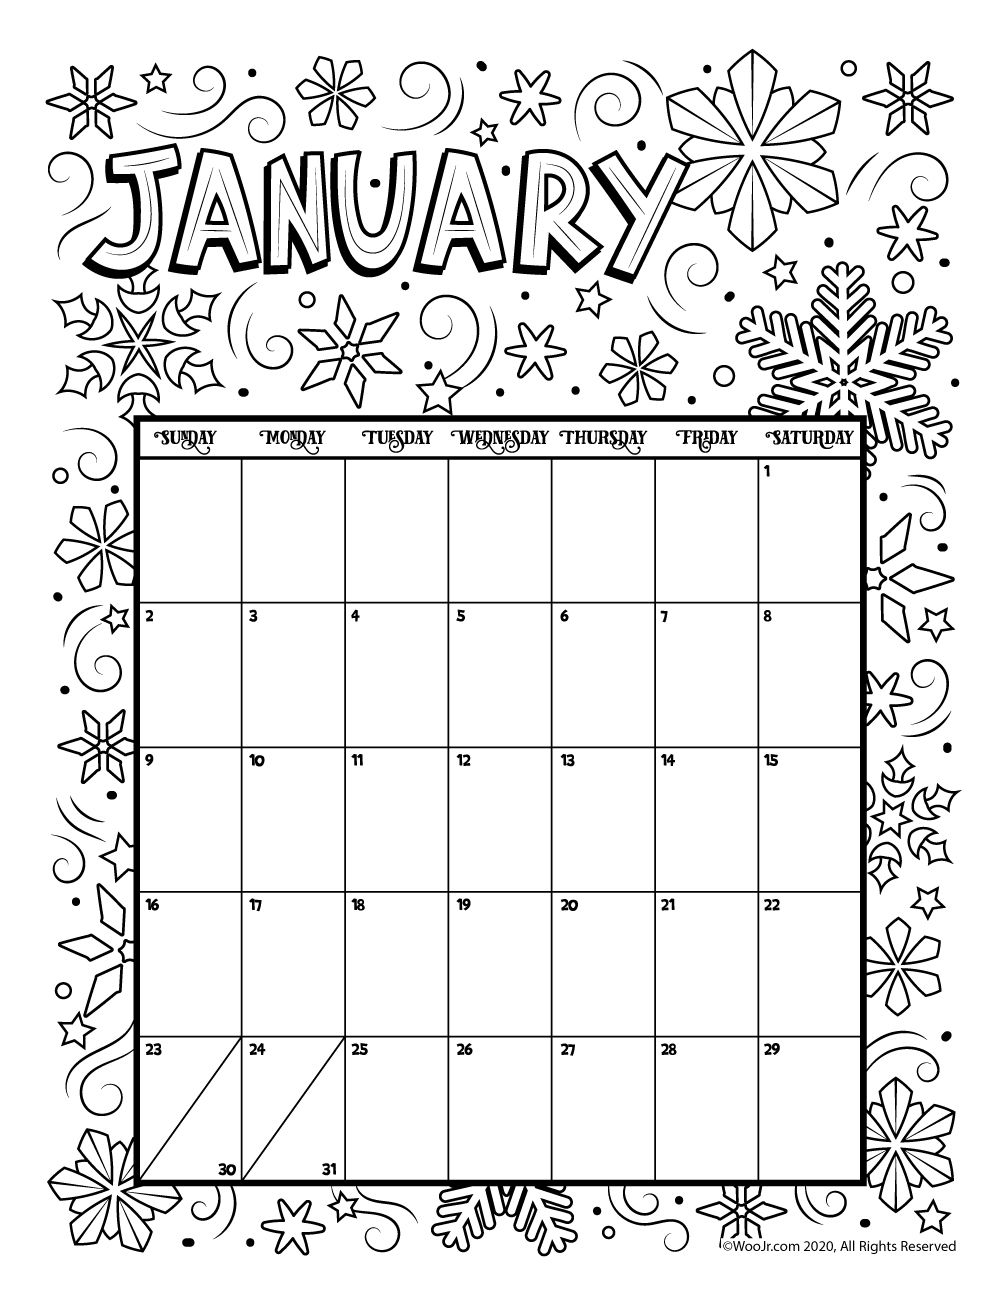 January printable coloring calendar page woo jr kids activities childrens publishing coloring calendar free printable calendar templates printable calendar pages